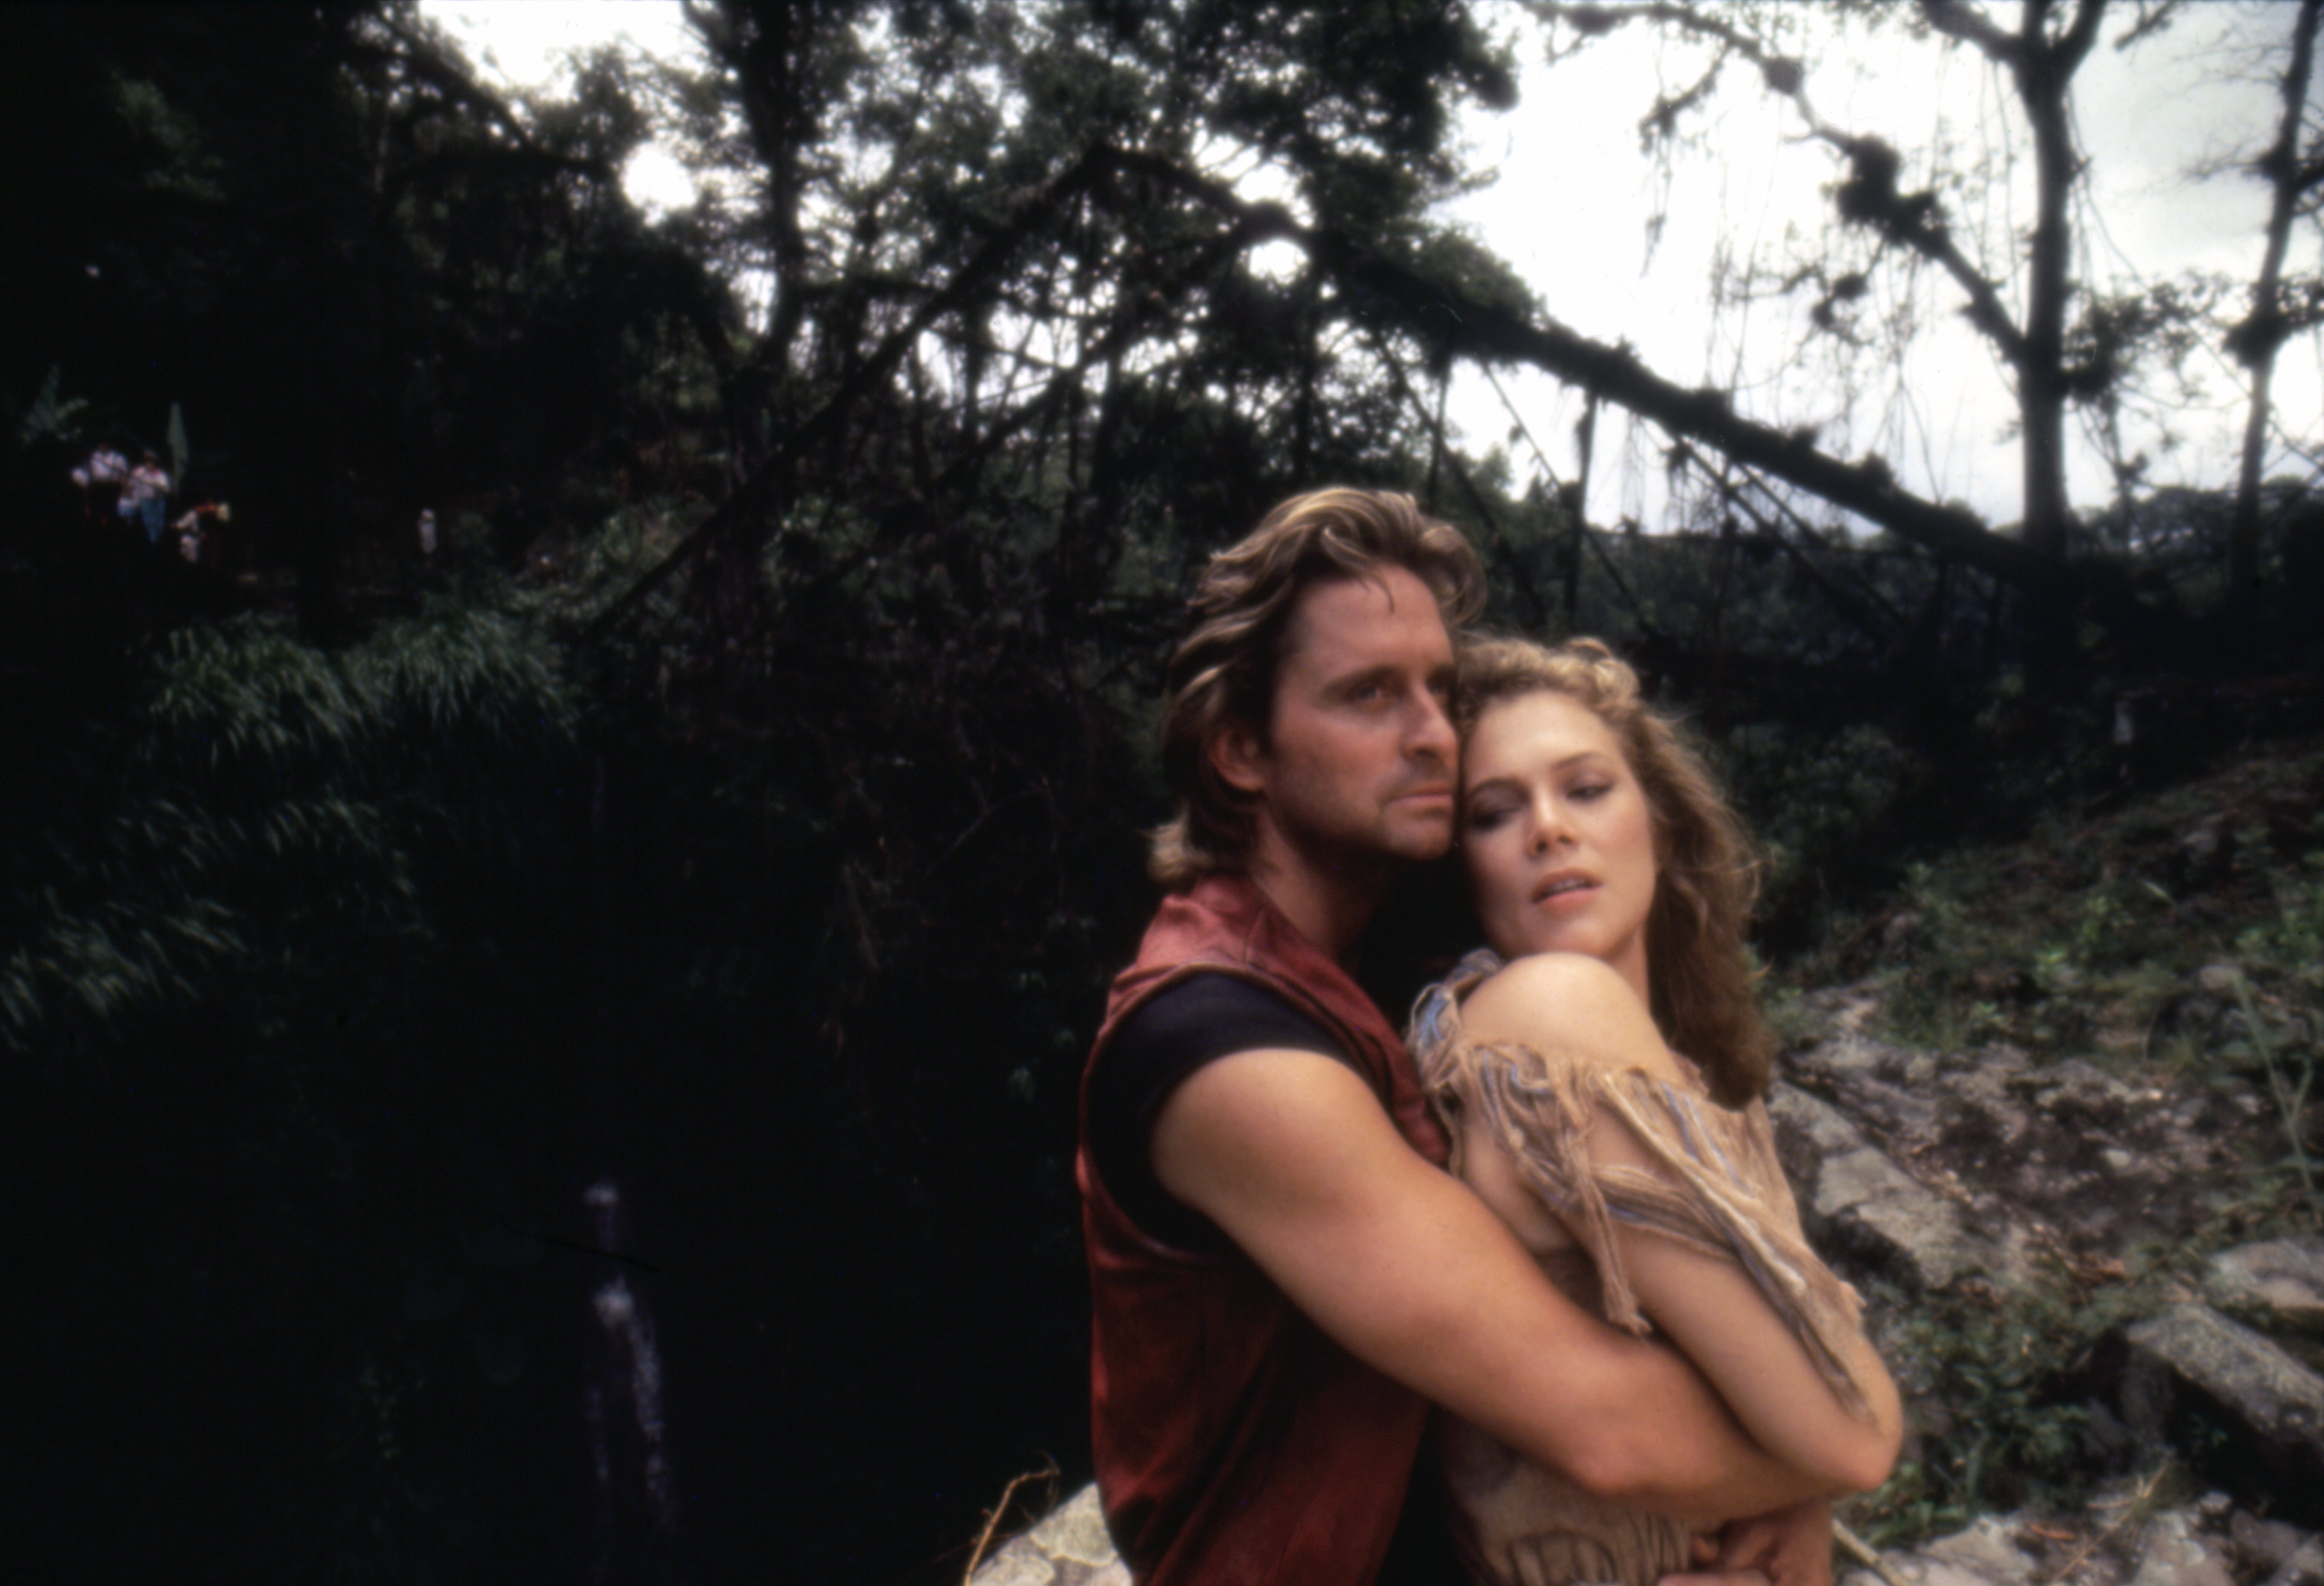 Michael Douglas and Kathleen Turner pictured in an embrace in the adventure film "Romancing the Stone." / Source: Getty Images